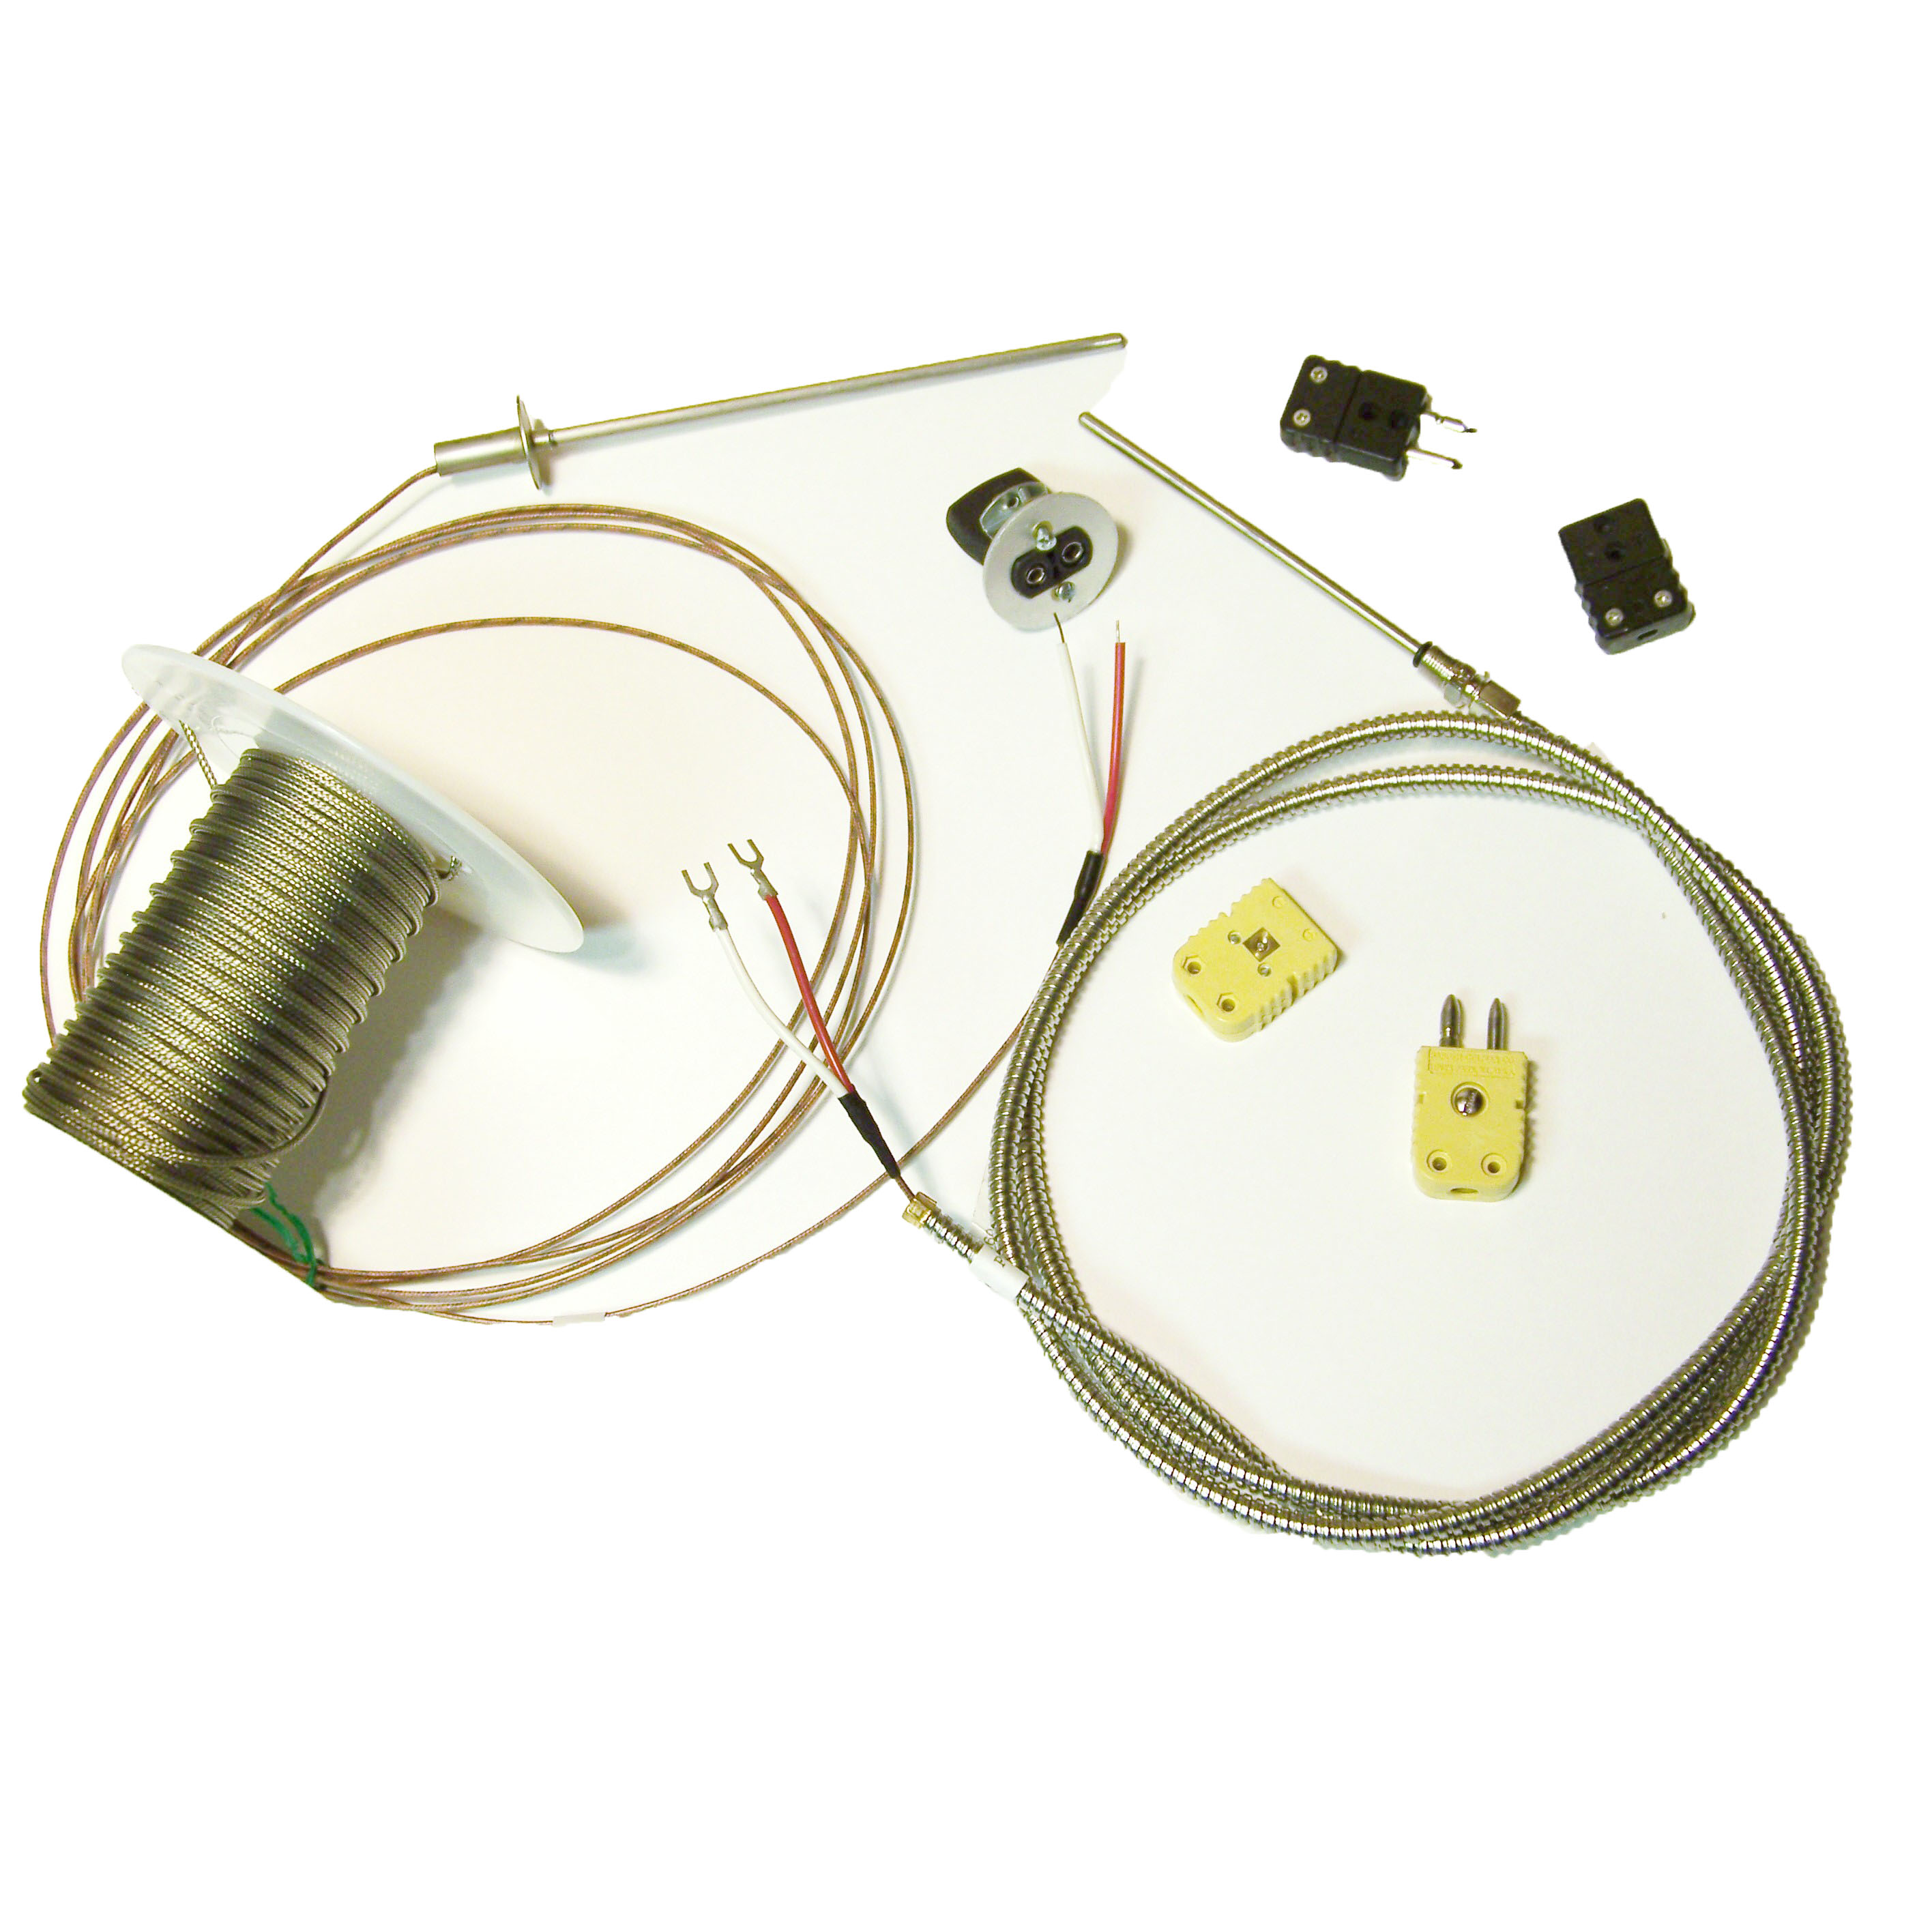 Details about   Lennox P-3-462 Lead Thermocouple